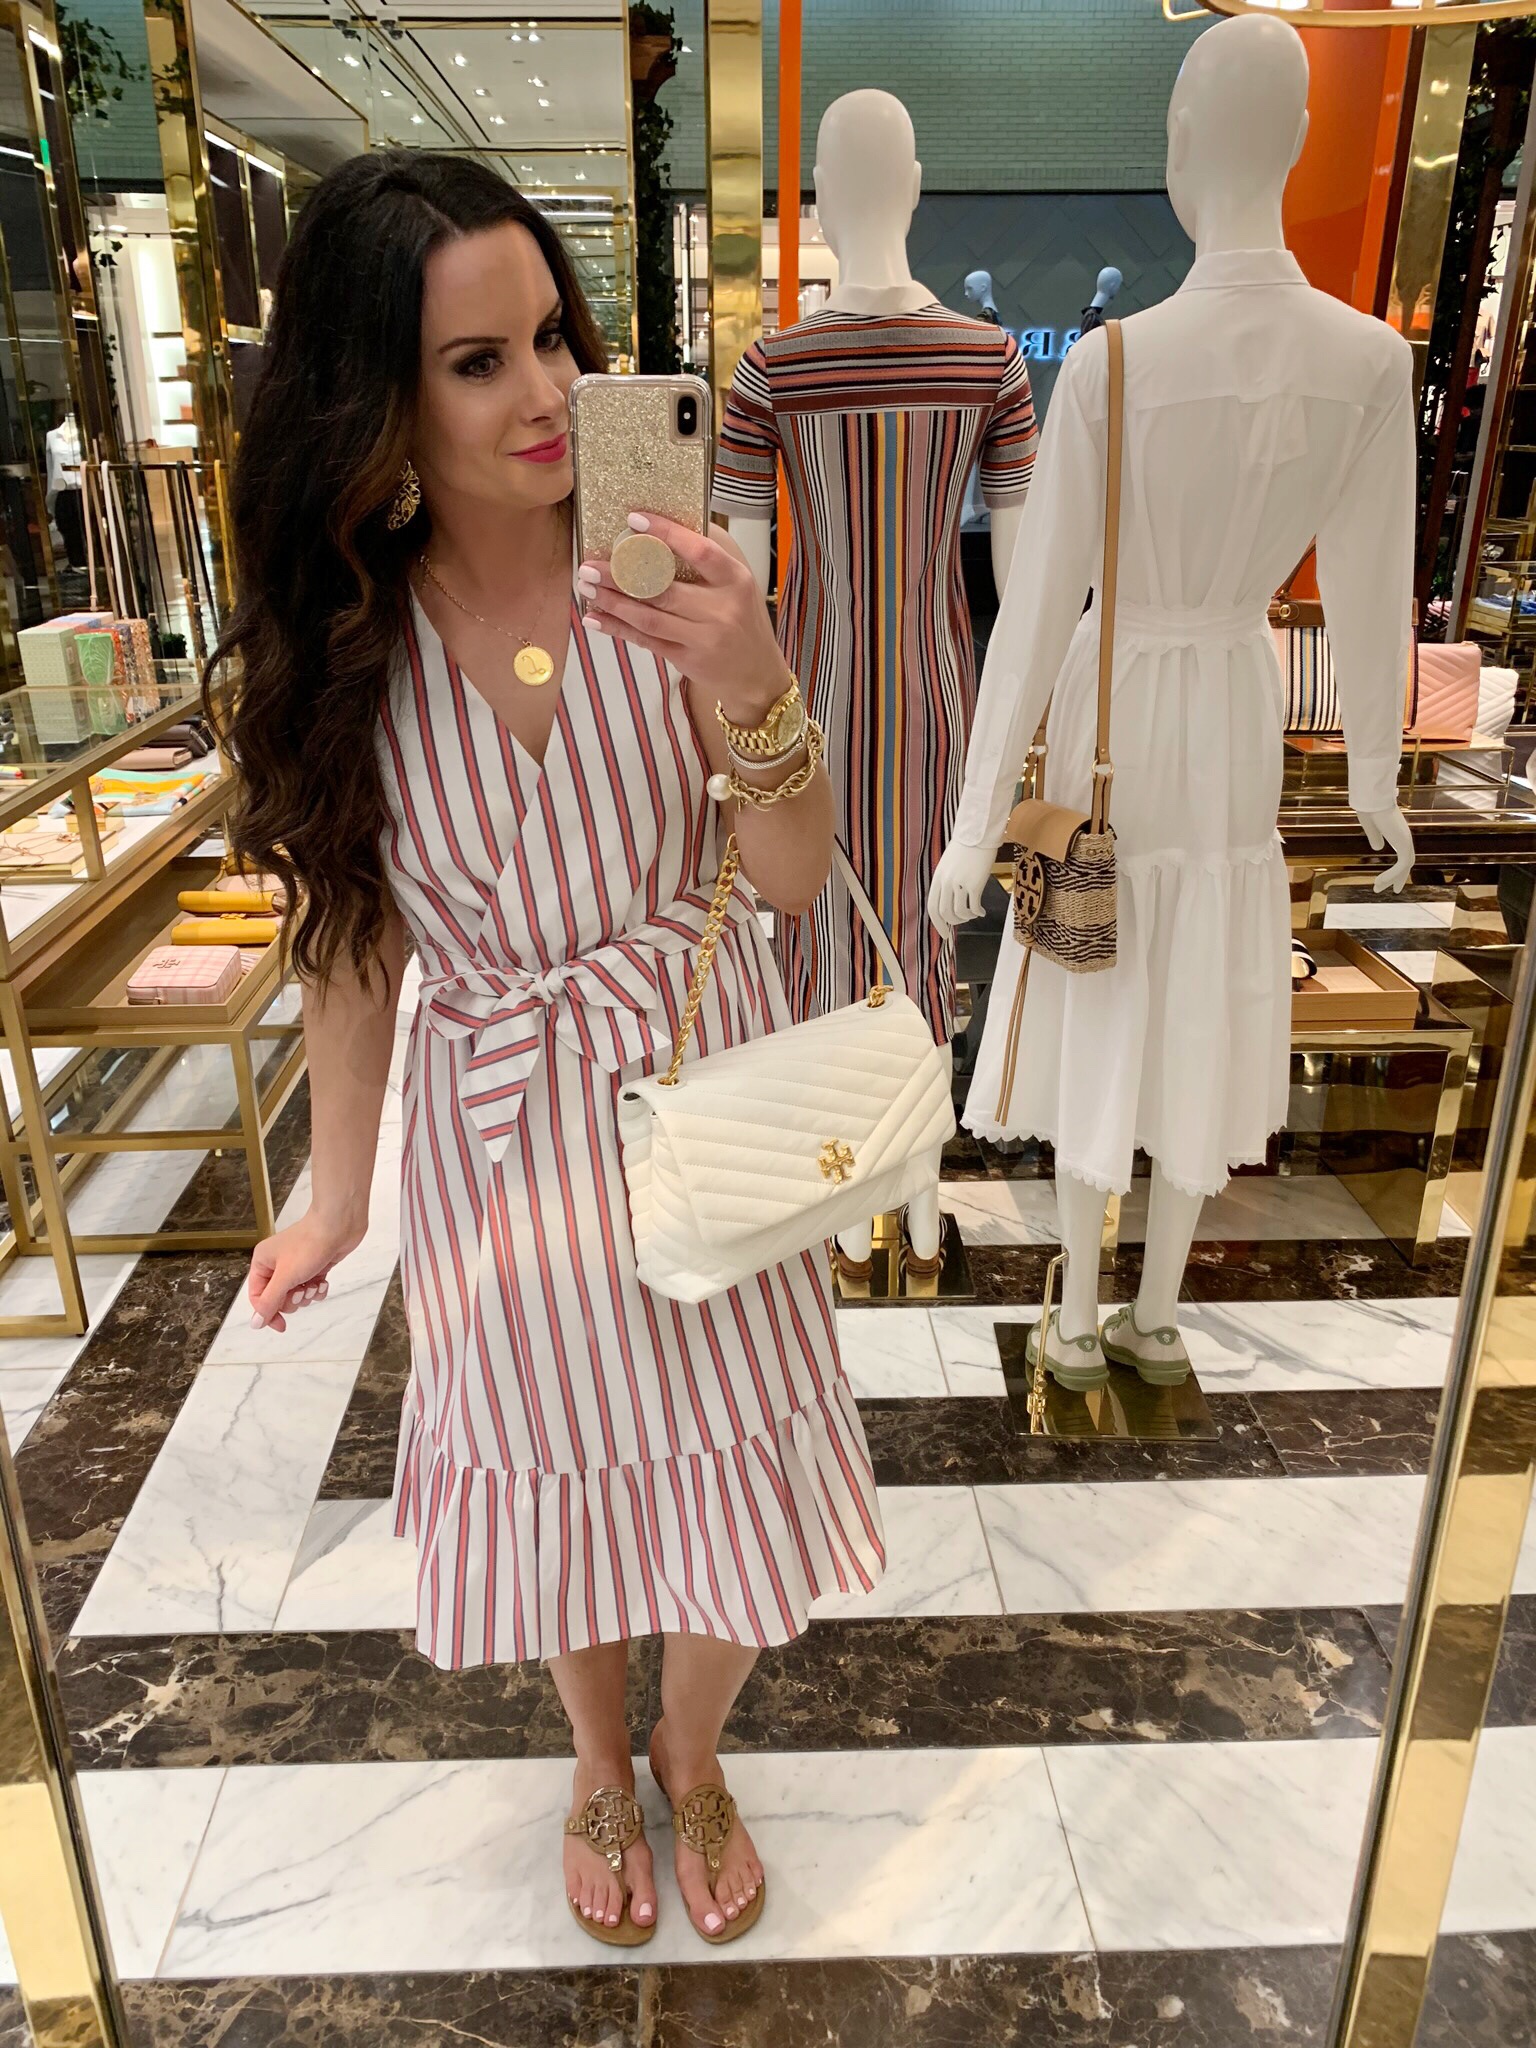 Tory Burch Spring Event 2019 | Save Up To 30% Off! - The Double Take Girls